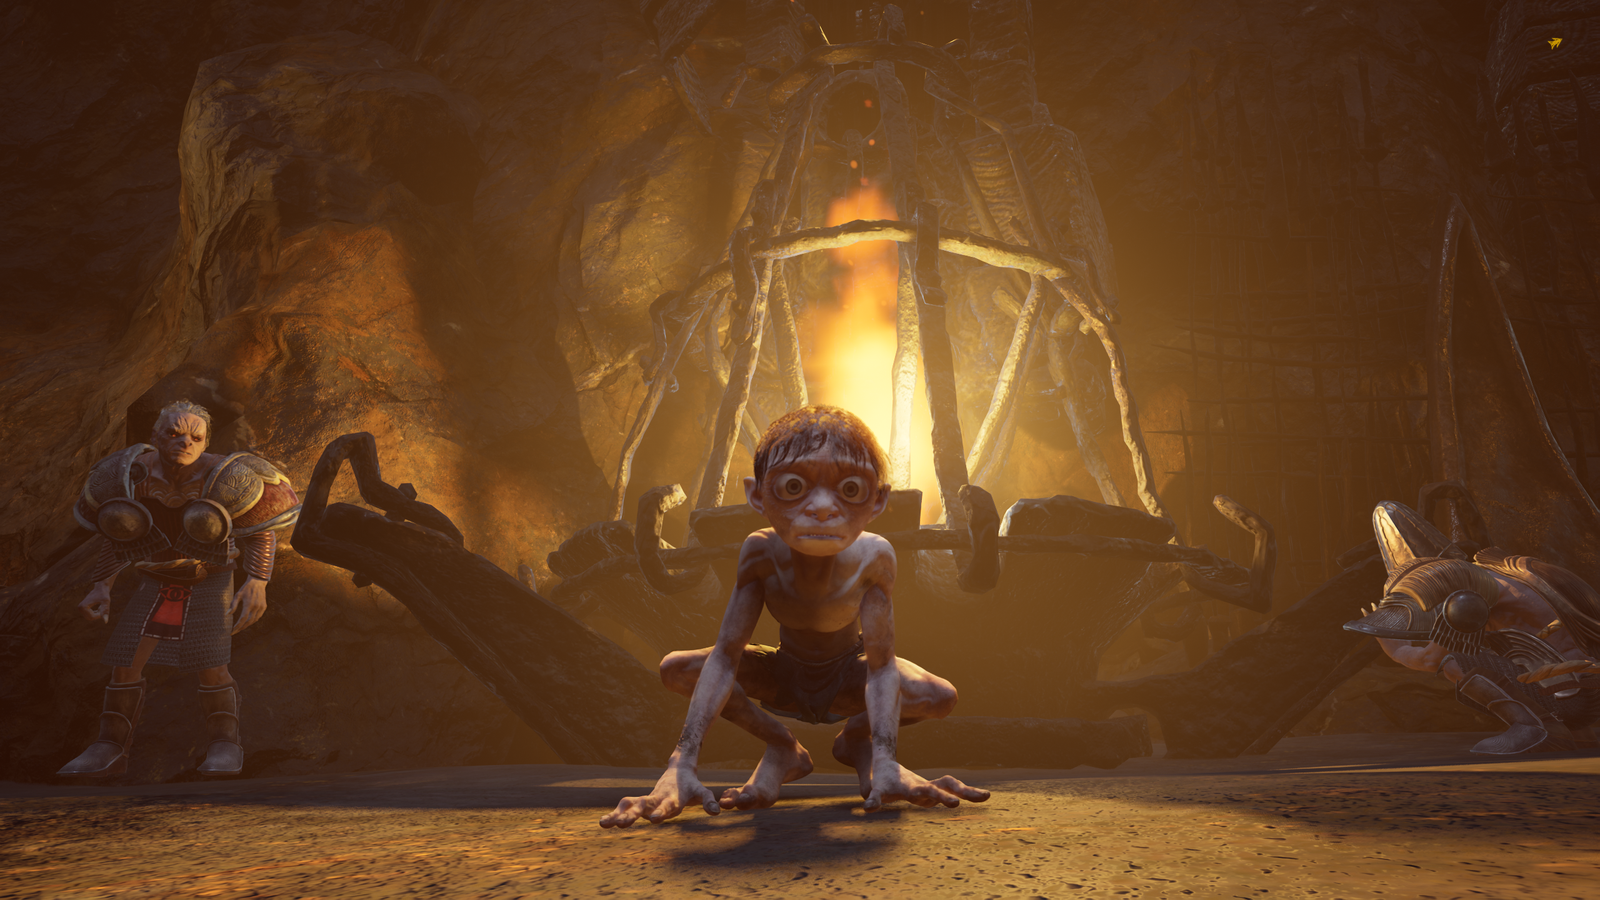 The Lord of the Rings: Gollum's New Trailer Highlights Stealth Gameplay